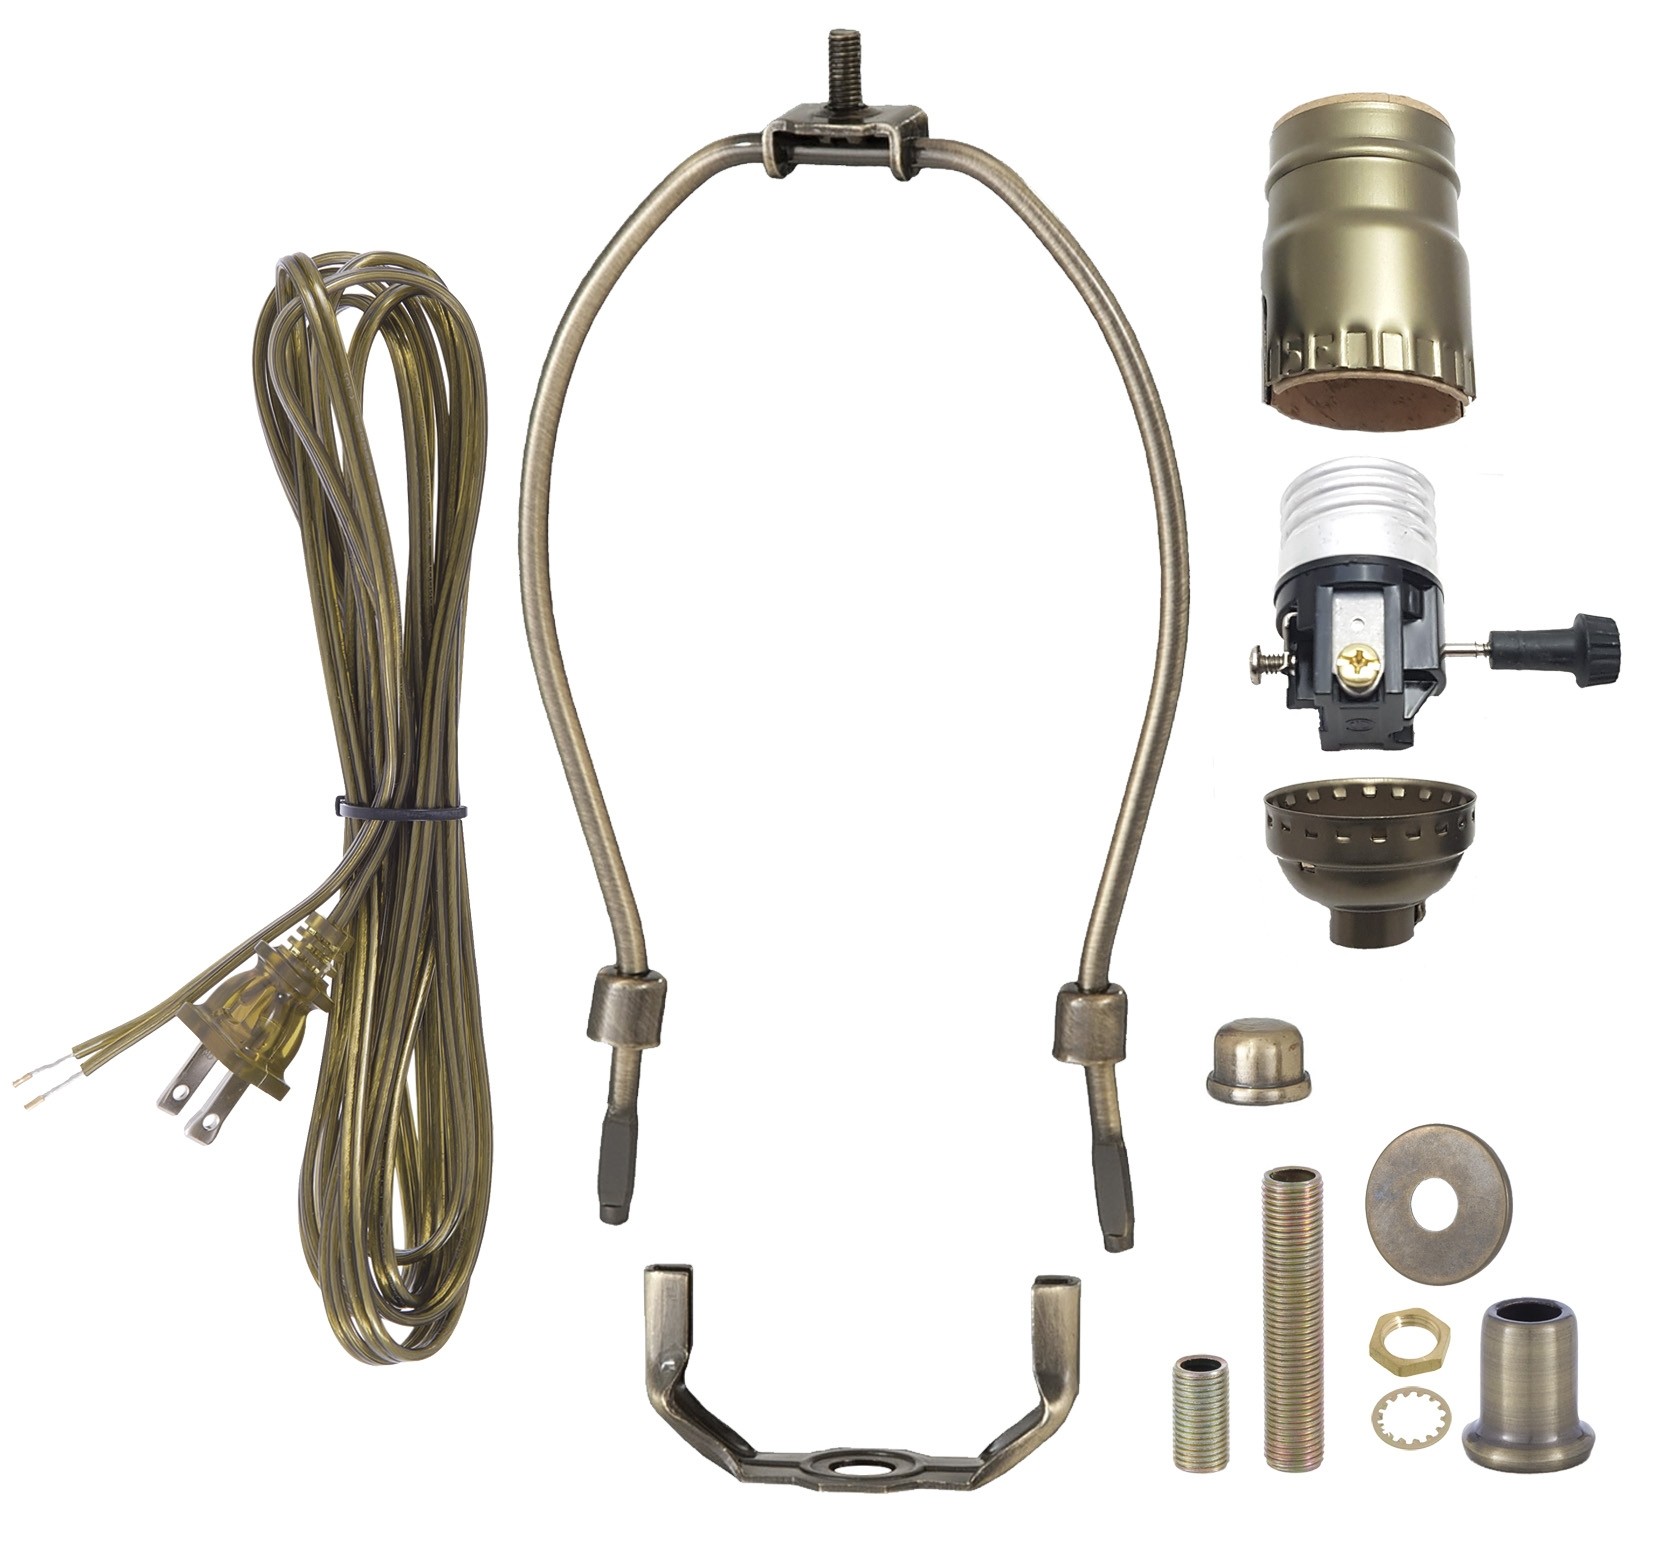 B&P Lamp® Antique Brass Finish Table Lamp Wiring Kit with a 7 Inch Harp and 3-Way Socket - image 1 of 5